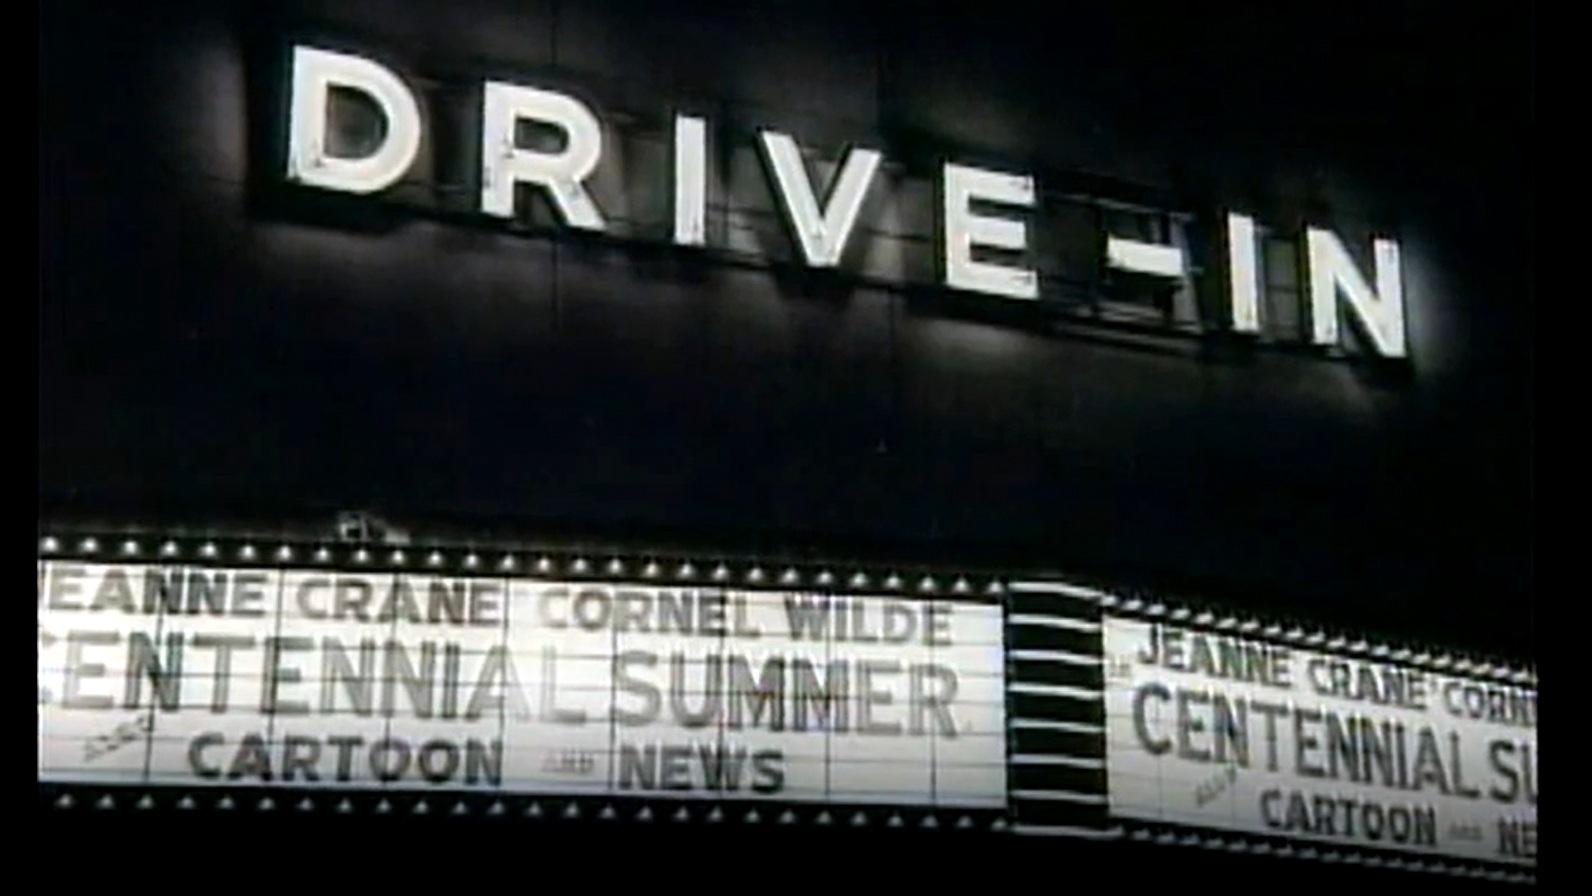 Drive-In theater sign at night.